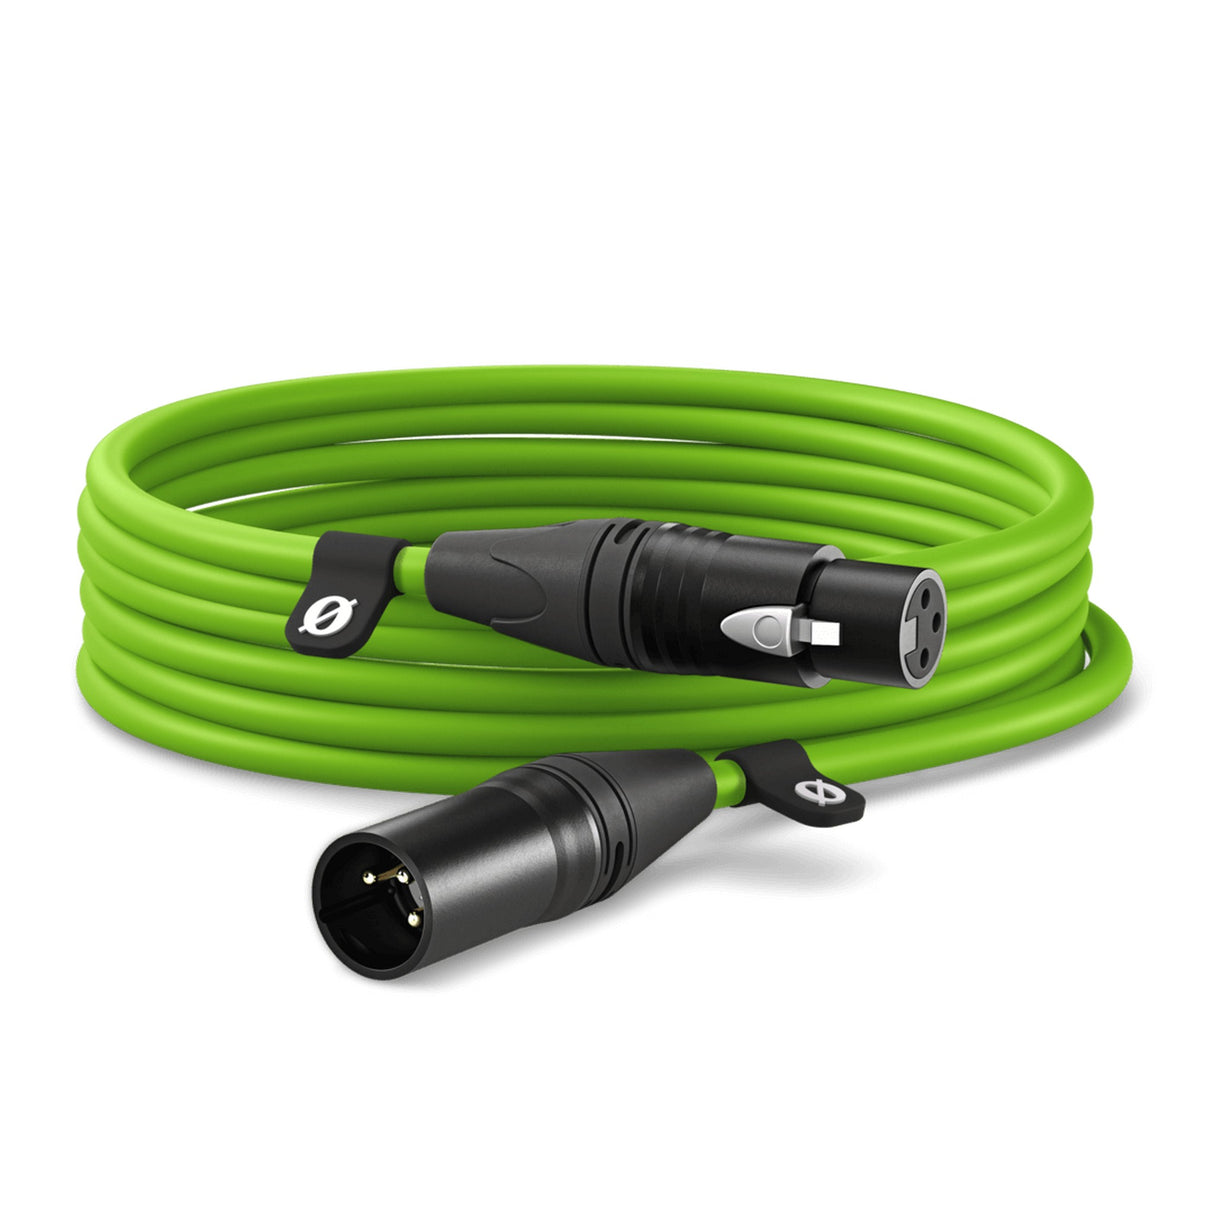 RODE XLR-6 6-Foot Premium Male to Female XLR Cable, Green